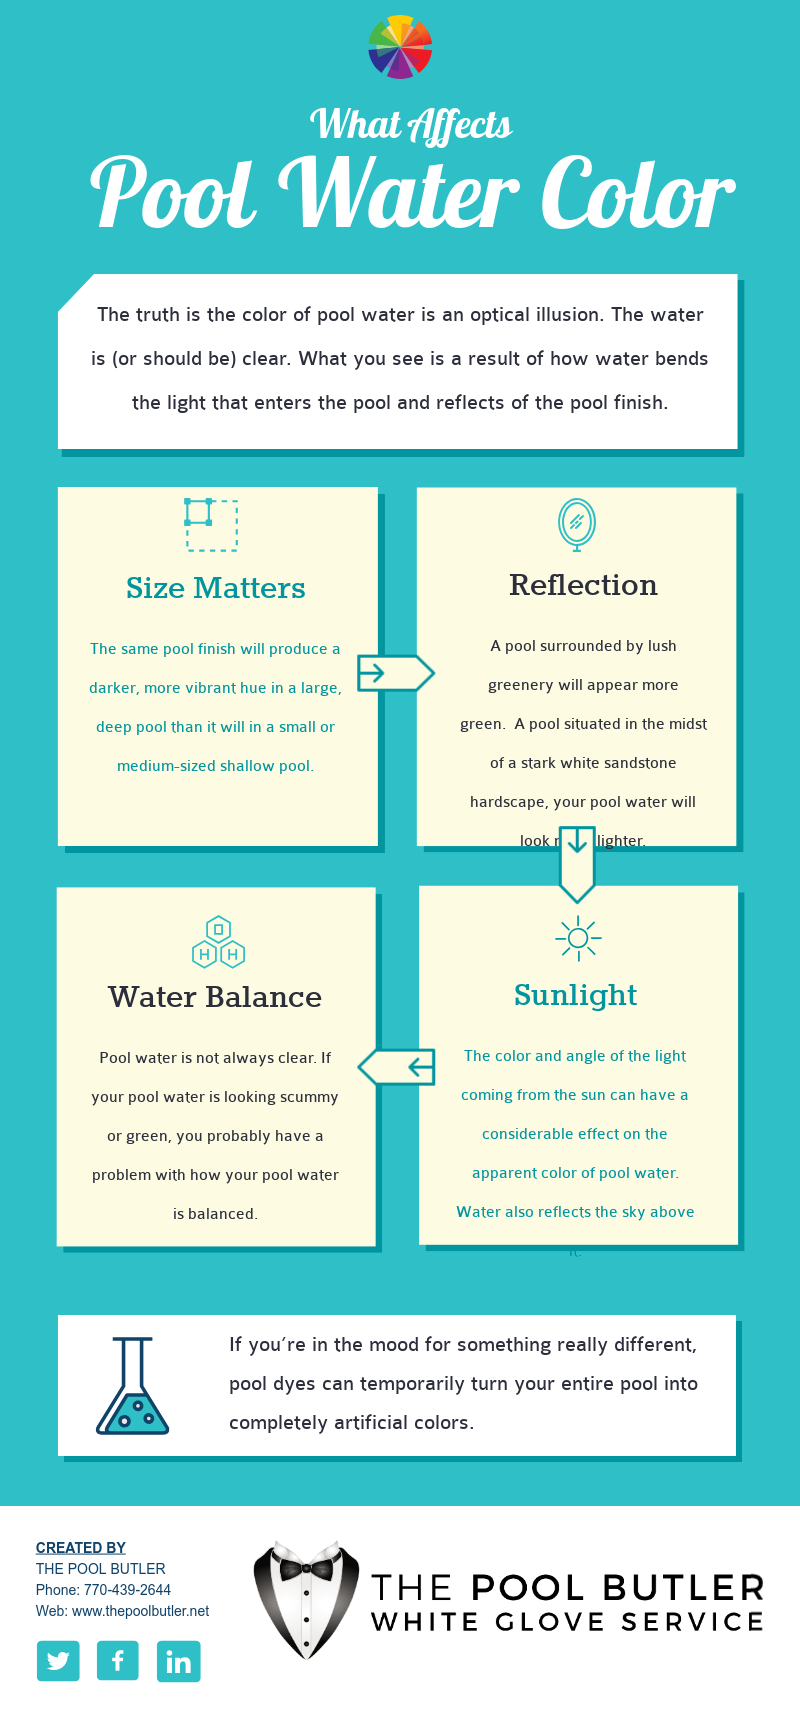 What Affects Pool Water Color [infographic]